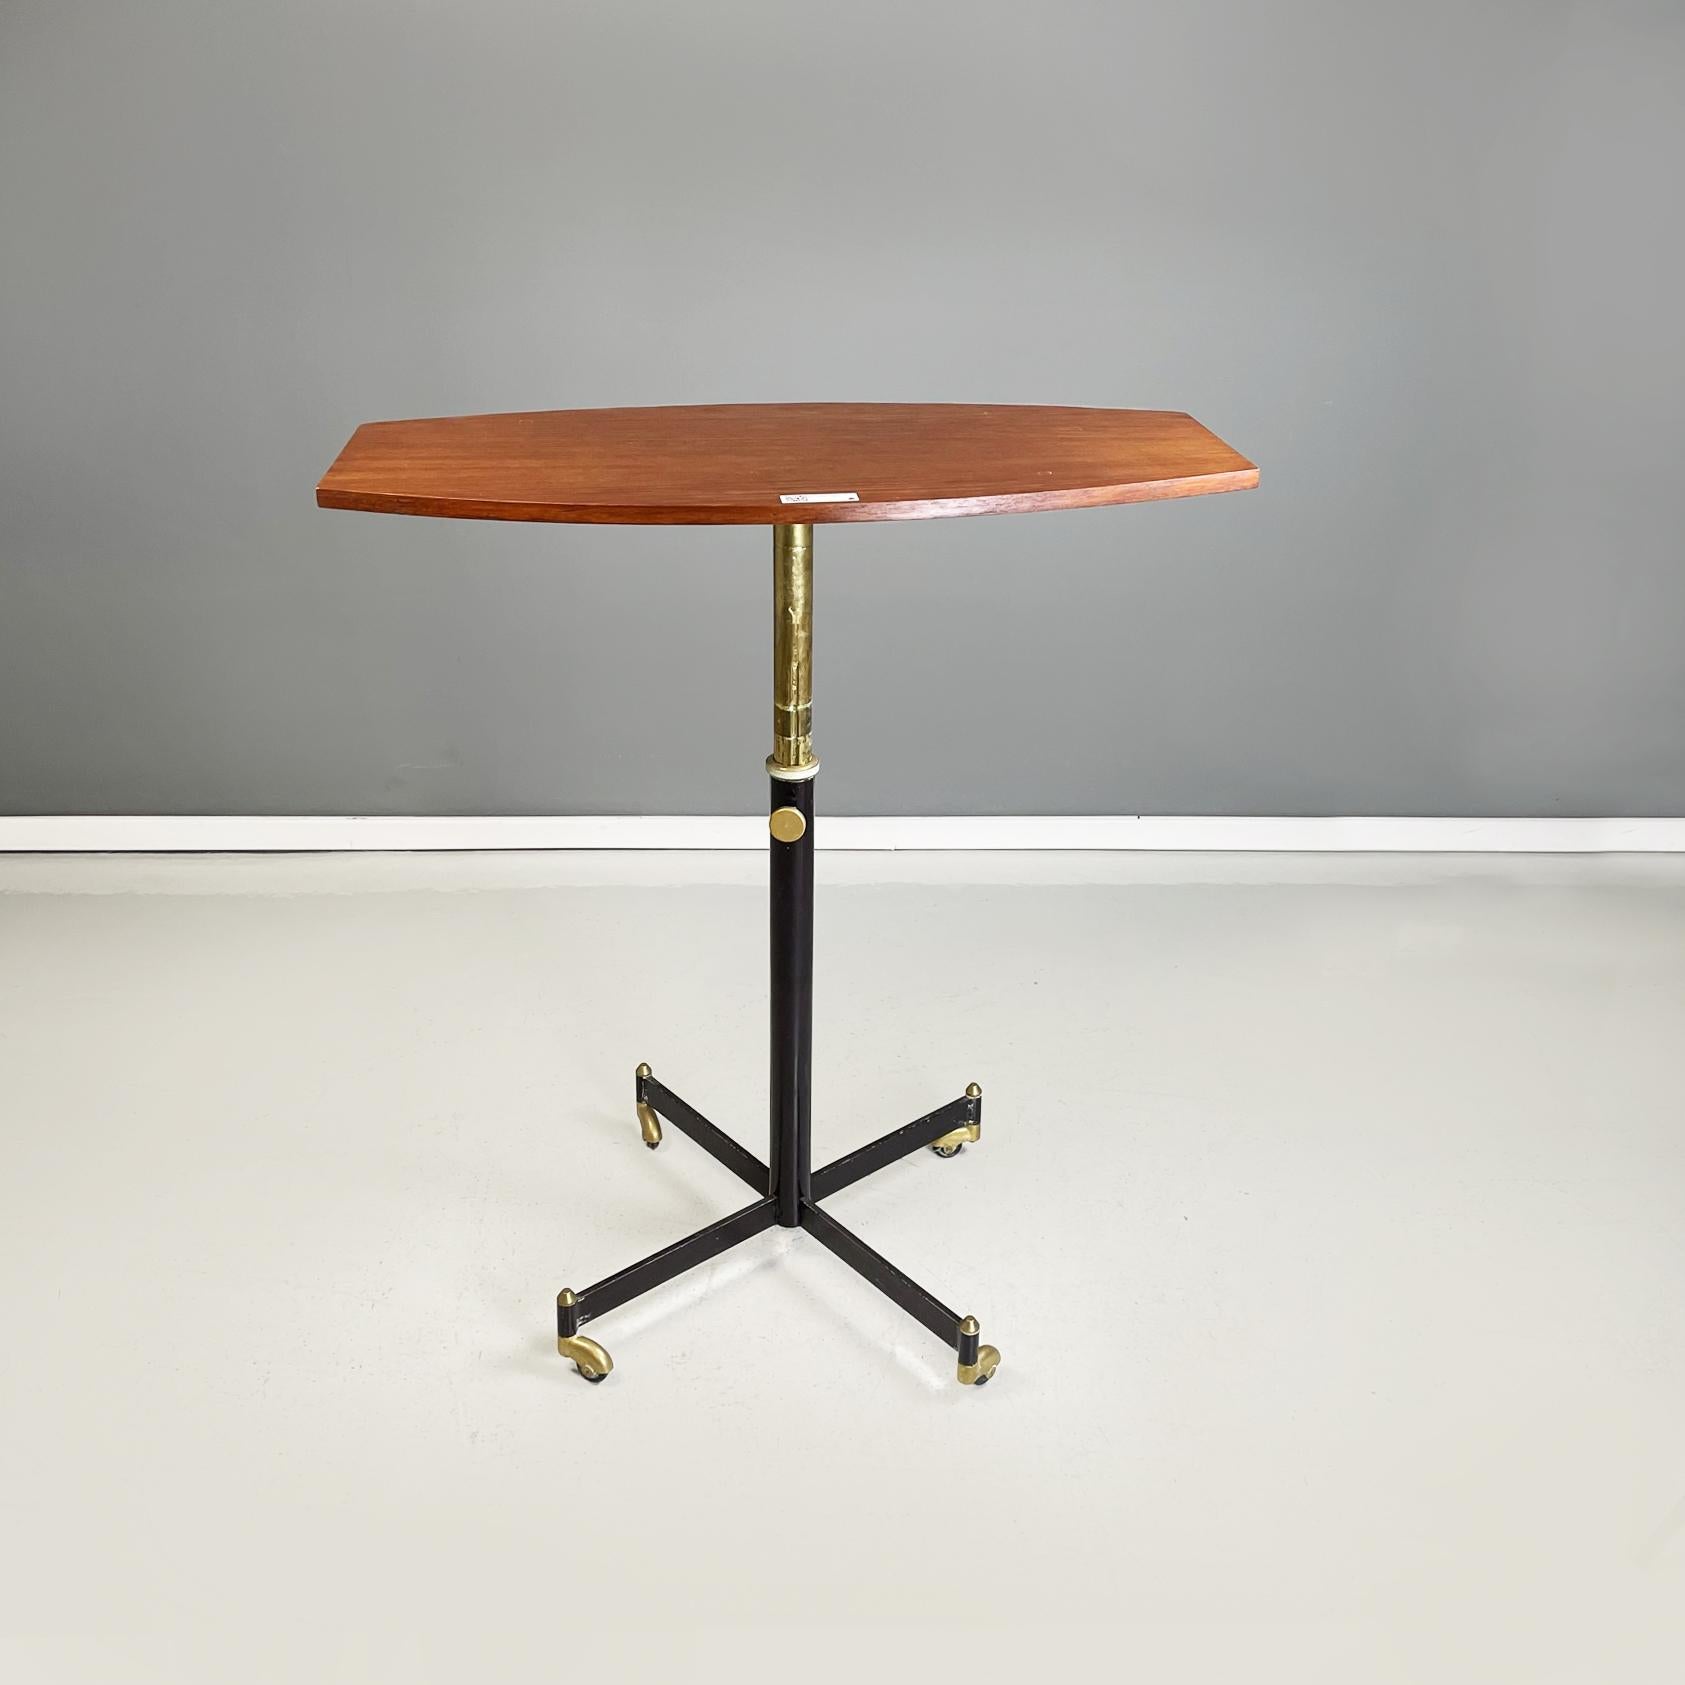 Italian Midcentury Table with Adjustable Wooden Top Withe Metal and Brass, 1950s In Good Condition For Sale In MIlano, IT